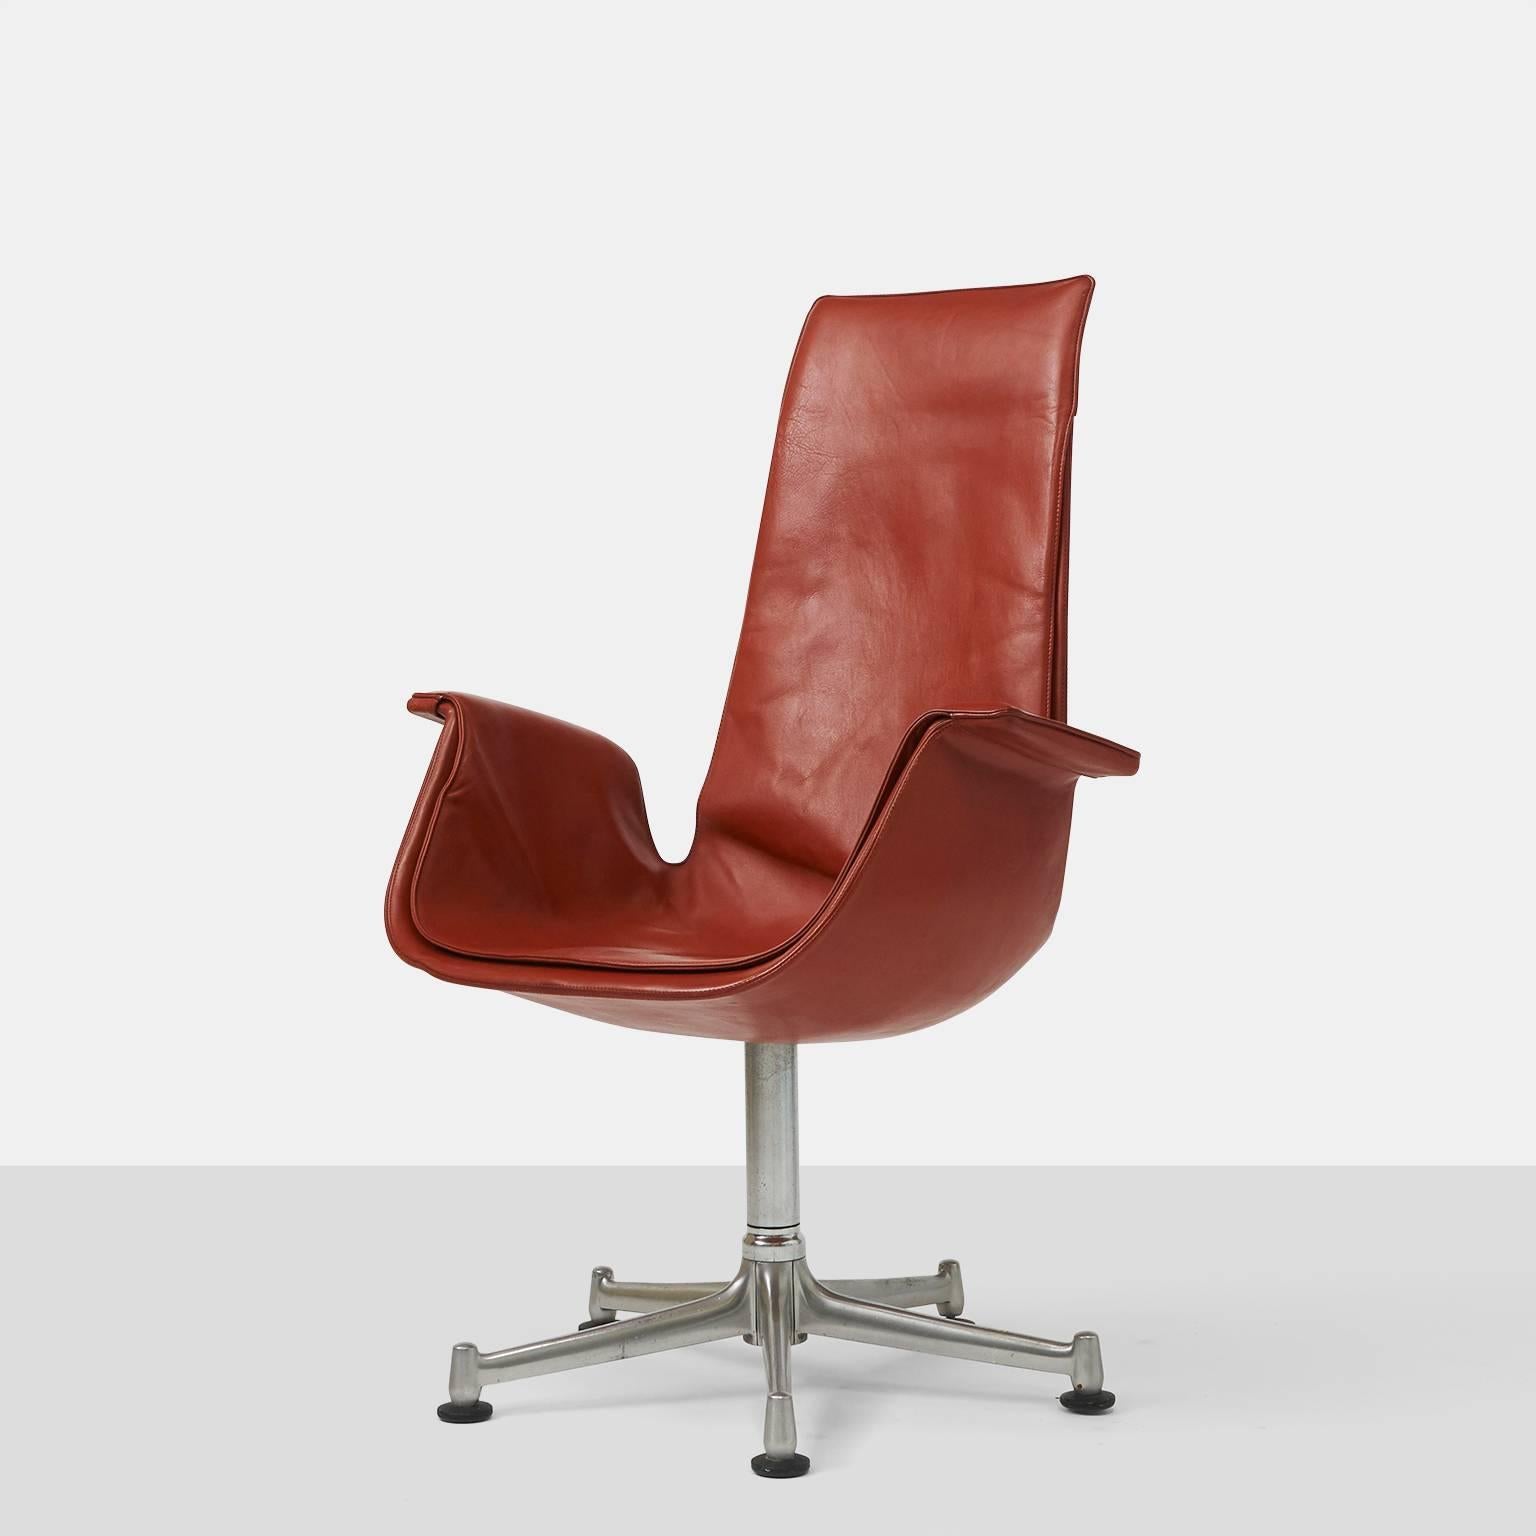 A cordovan leather swivel chair by Preben Fabricius & Jorgen Kastholm for Alfred Kill International. Marked with label underneath.